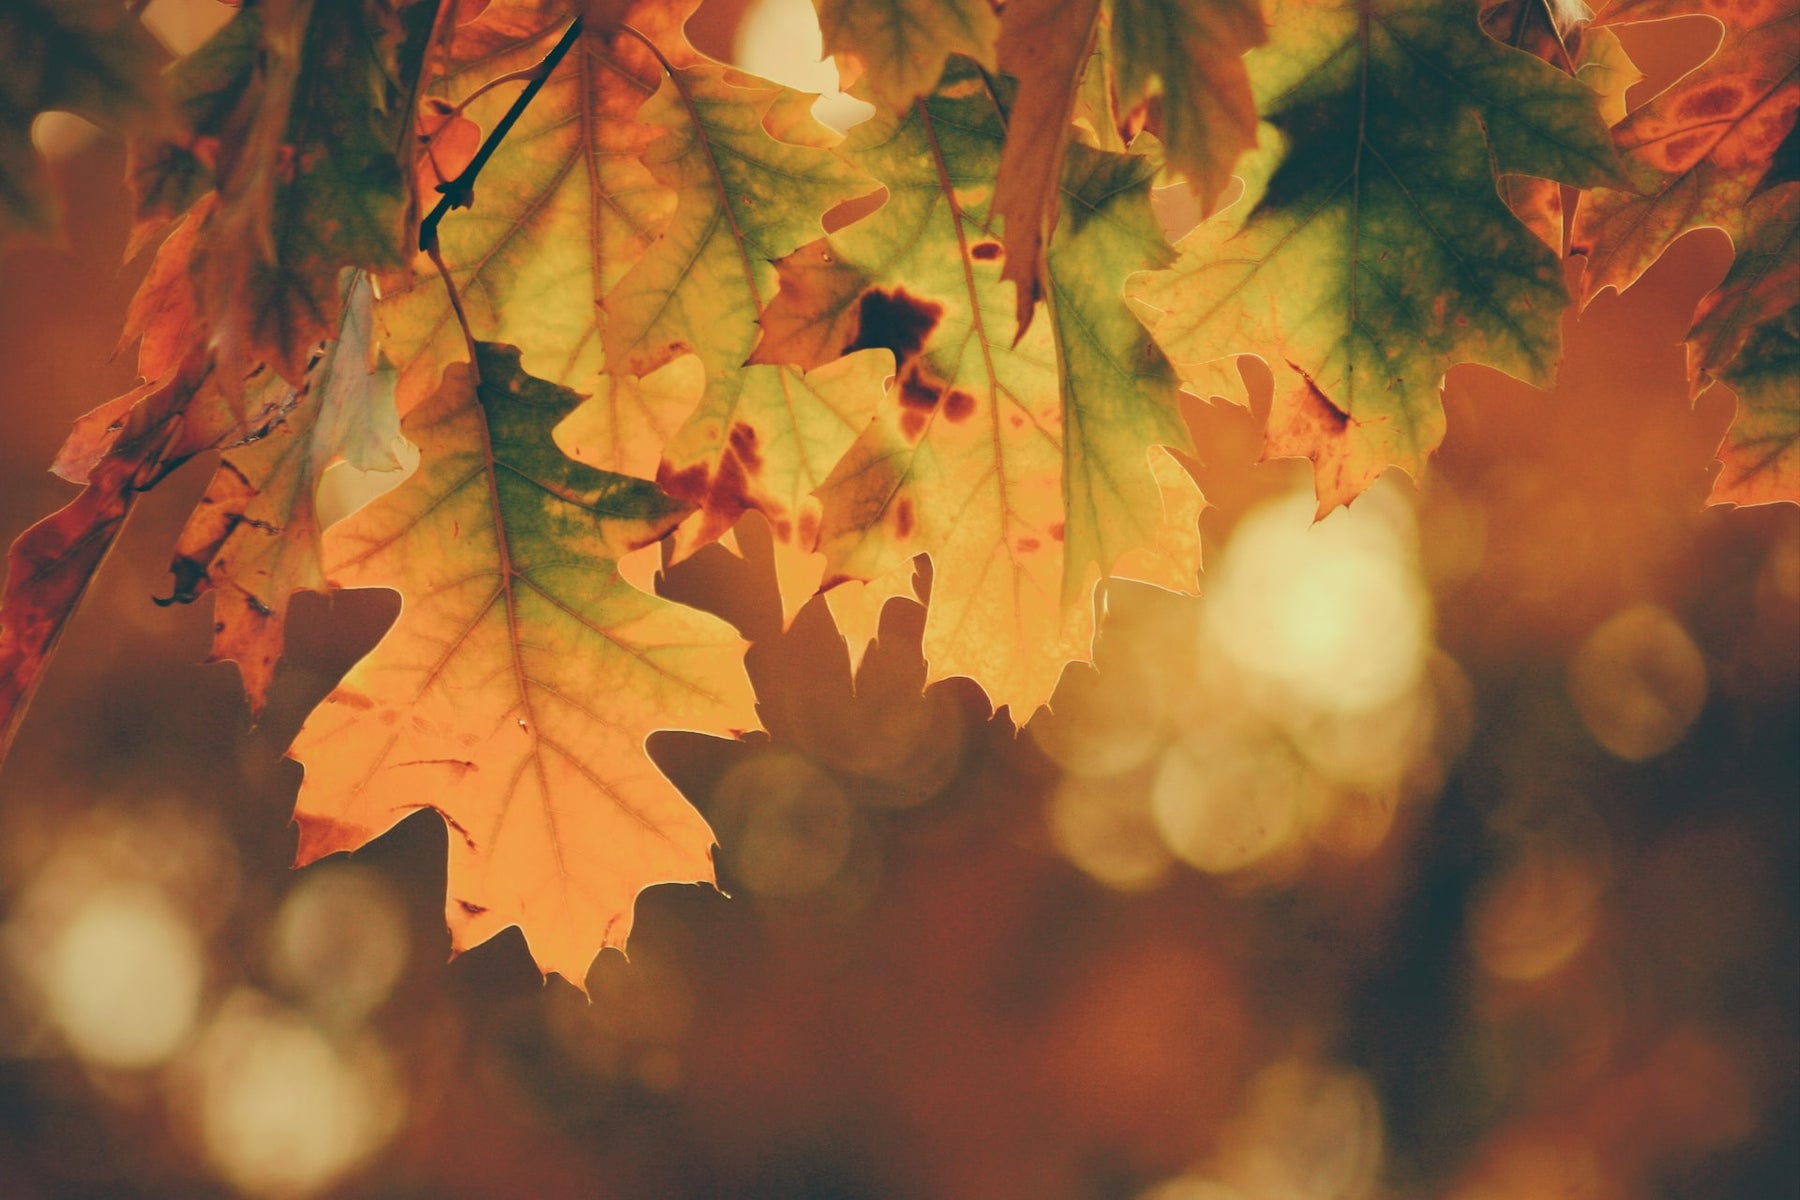 5 Great Tips To Get Your Garden Looking Fabulous For Autumn…